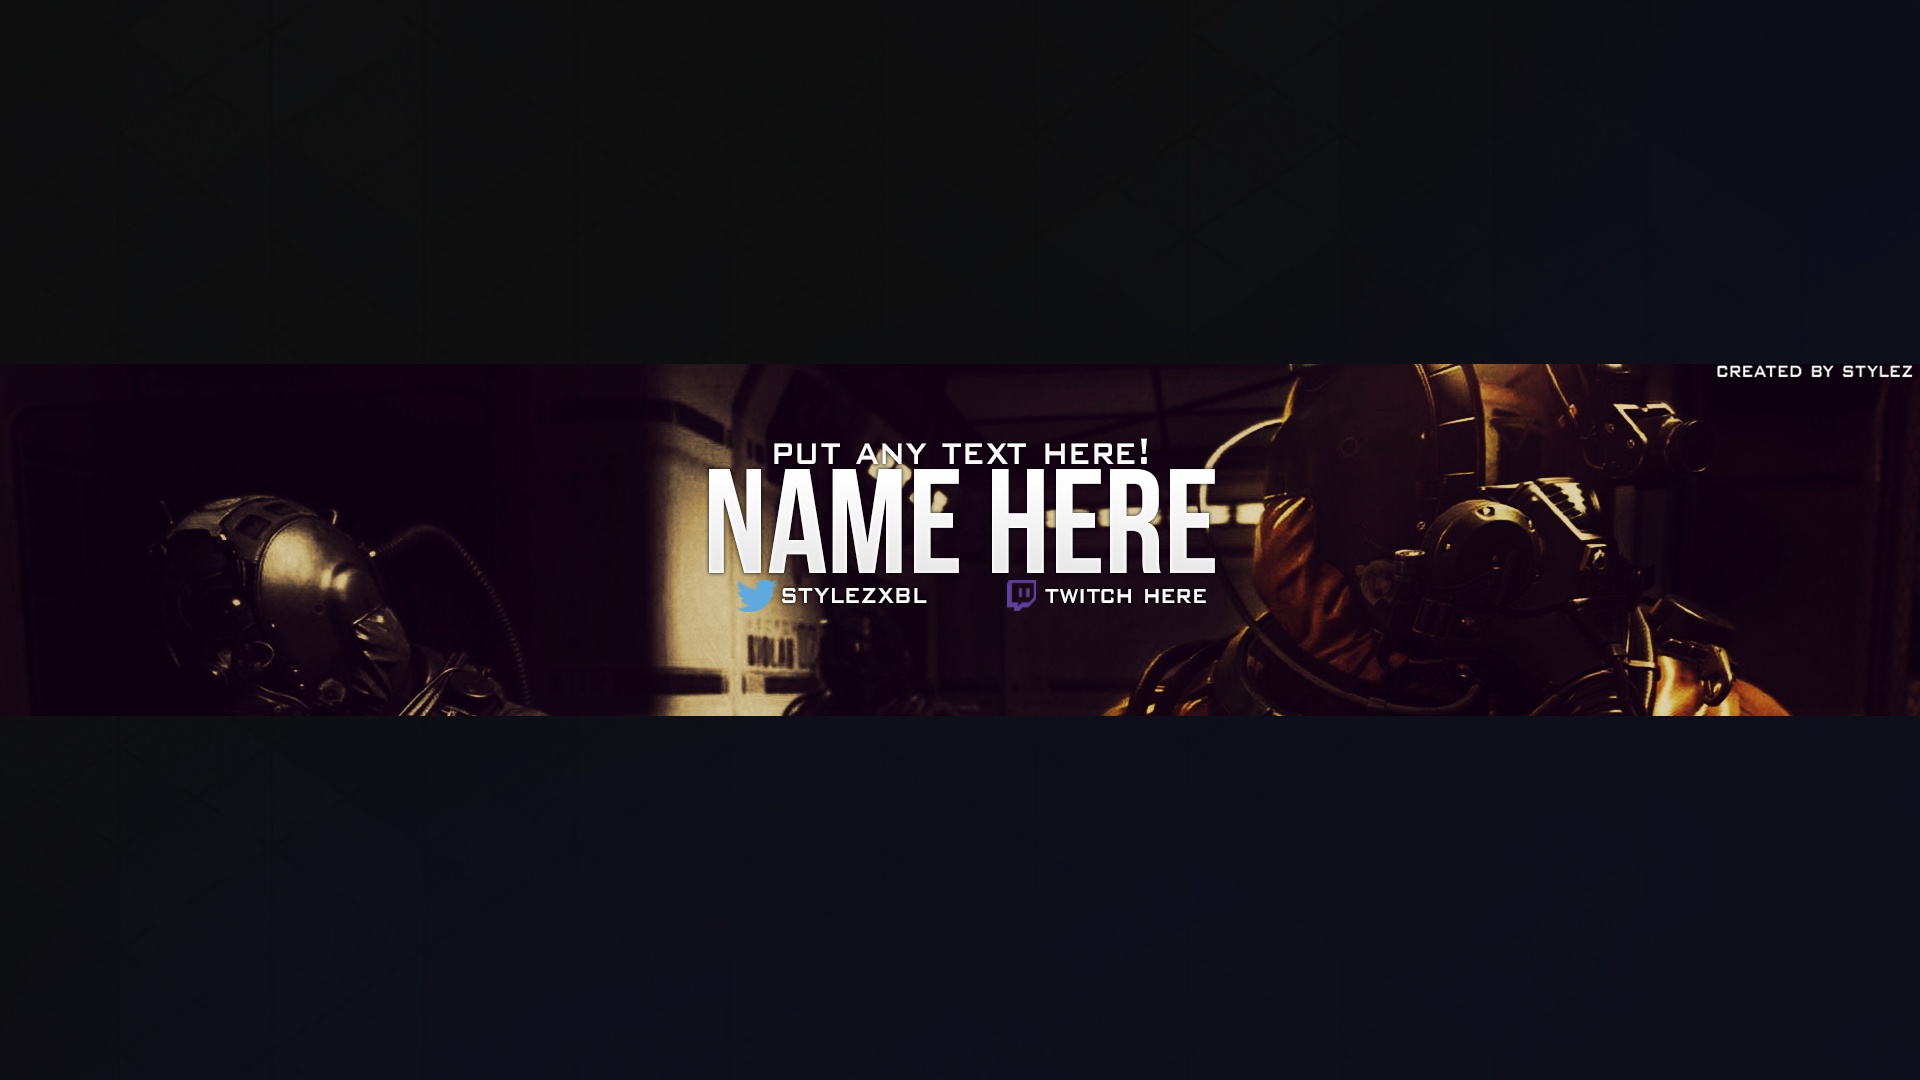 YouTube Channel Art Template